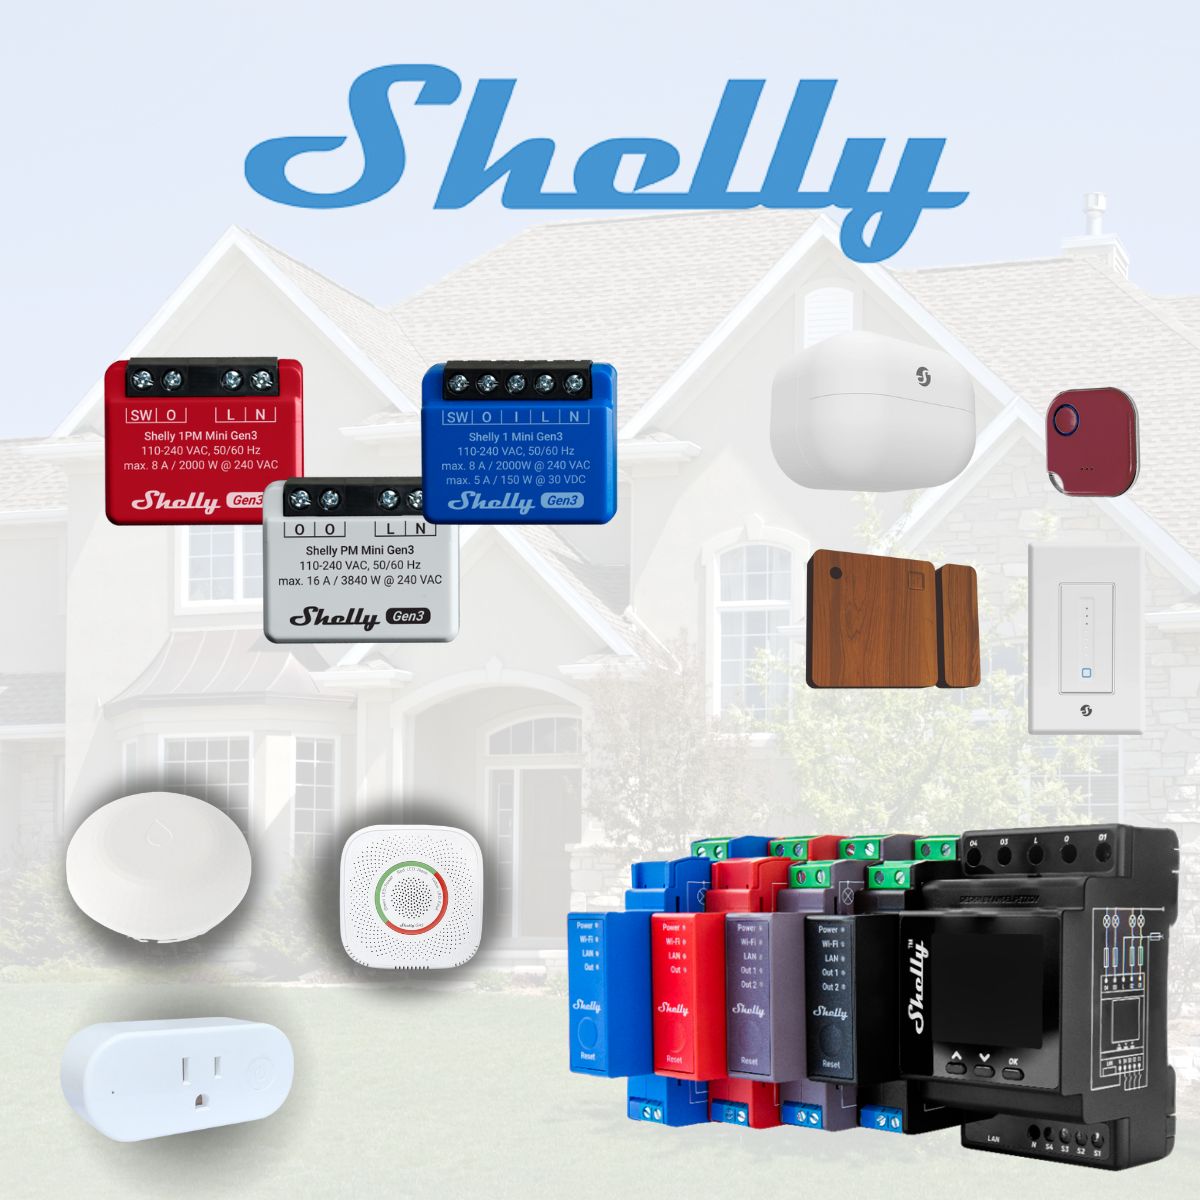 Shelly smart home products